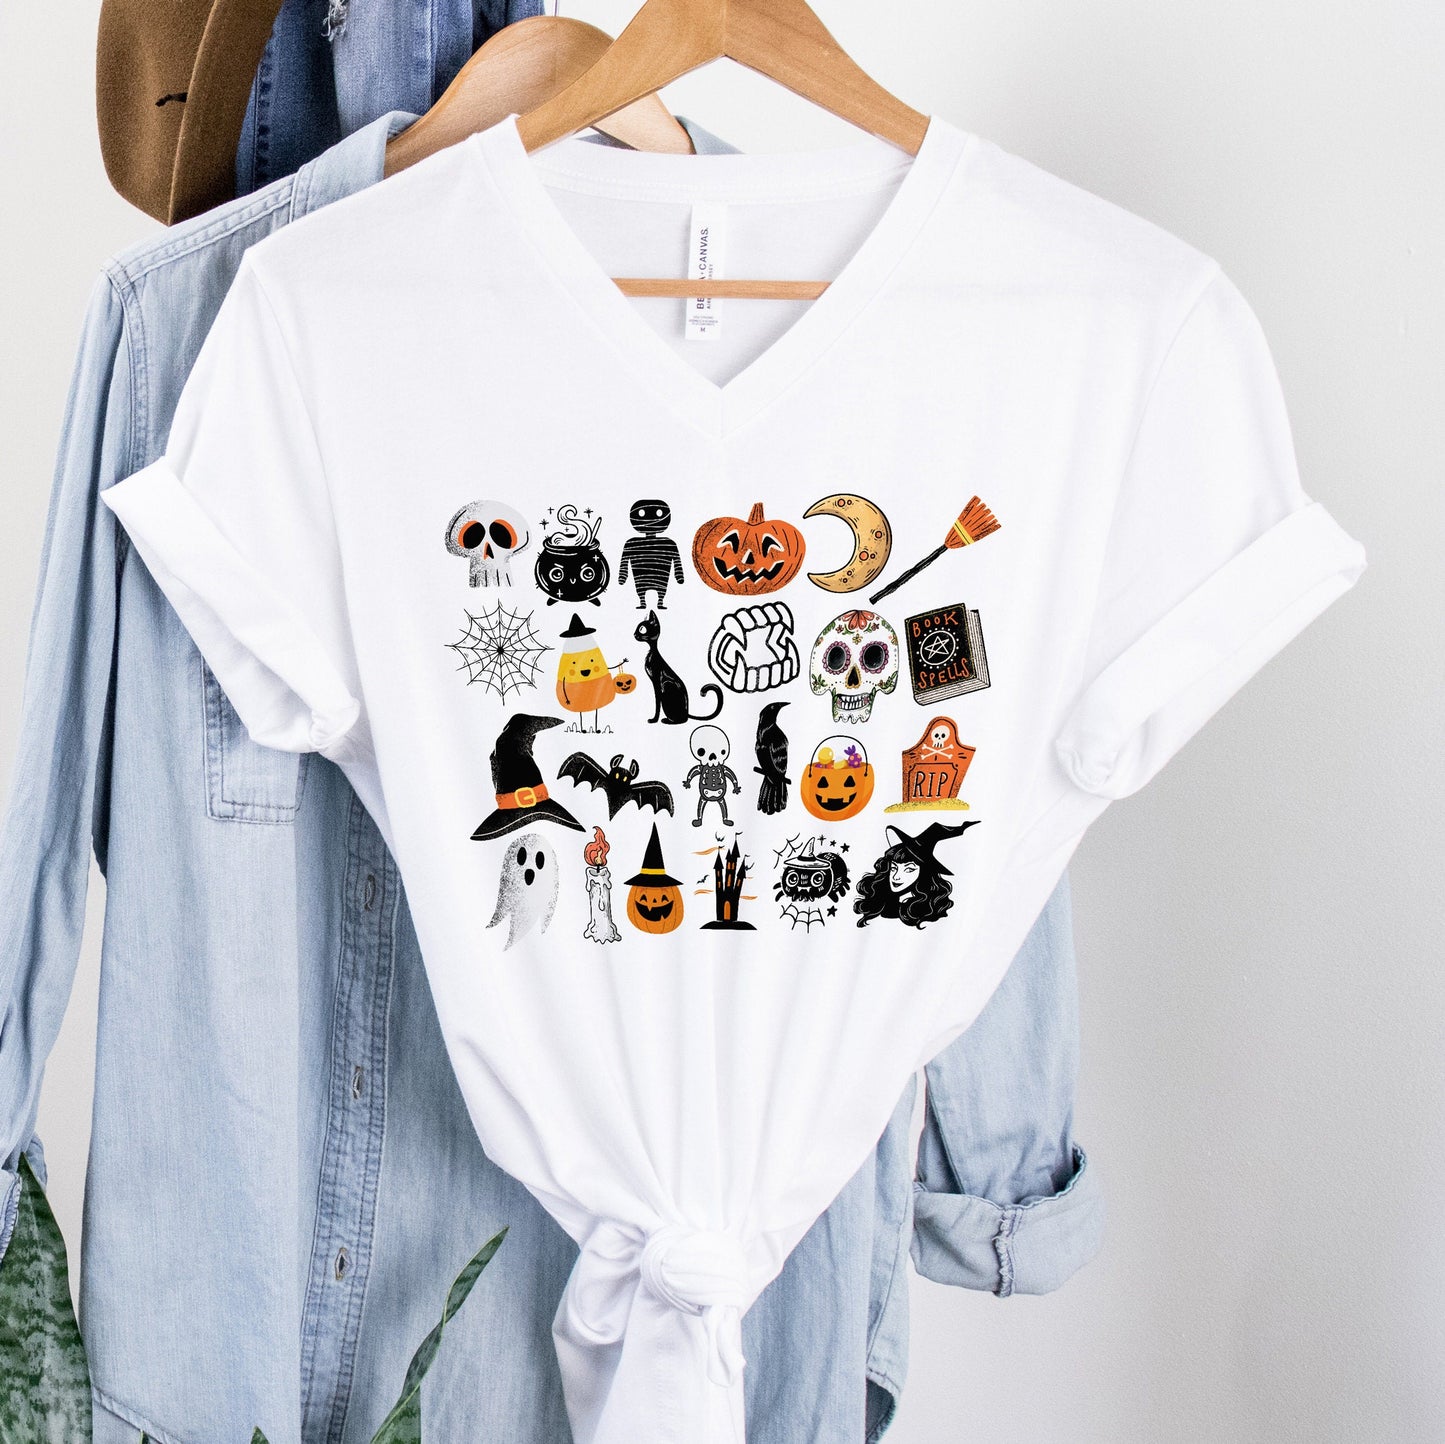 It’s the Little Things | Happy Halloween | UNISEX V-Neck T-Shirt